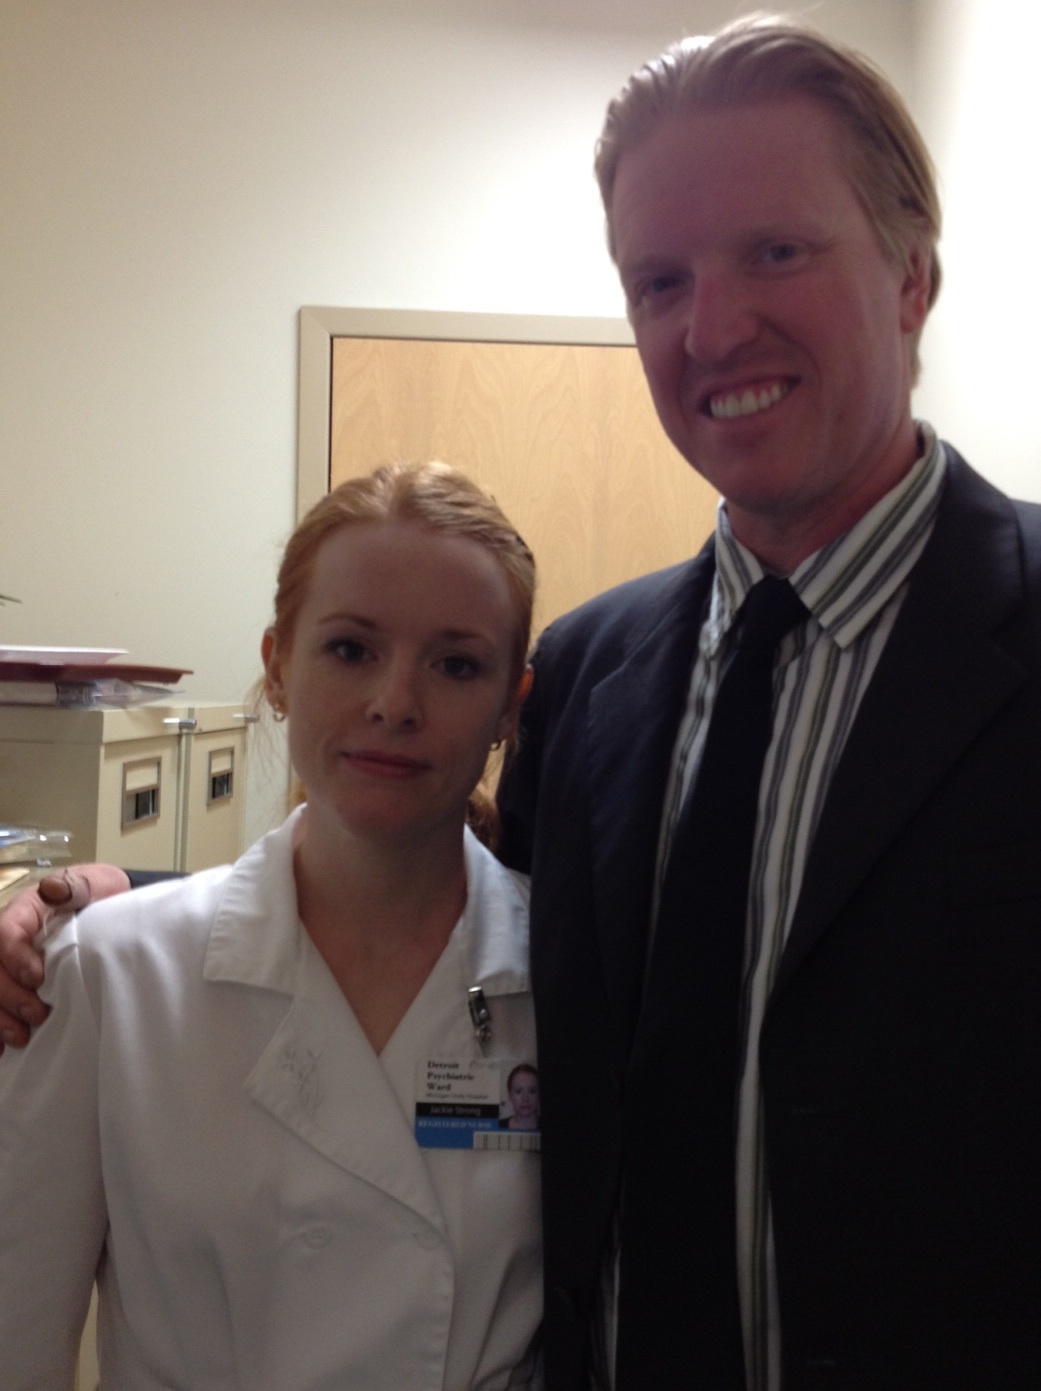 Jake Busey and Pauline Ann Johnson on the set of 'Fractured' Aug 2012